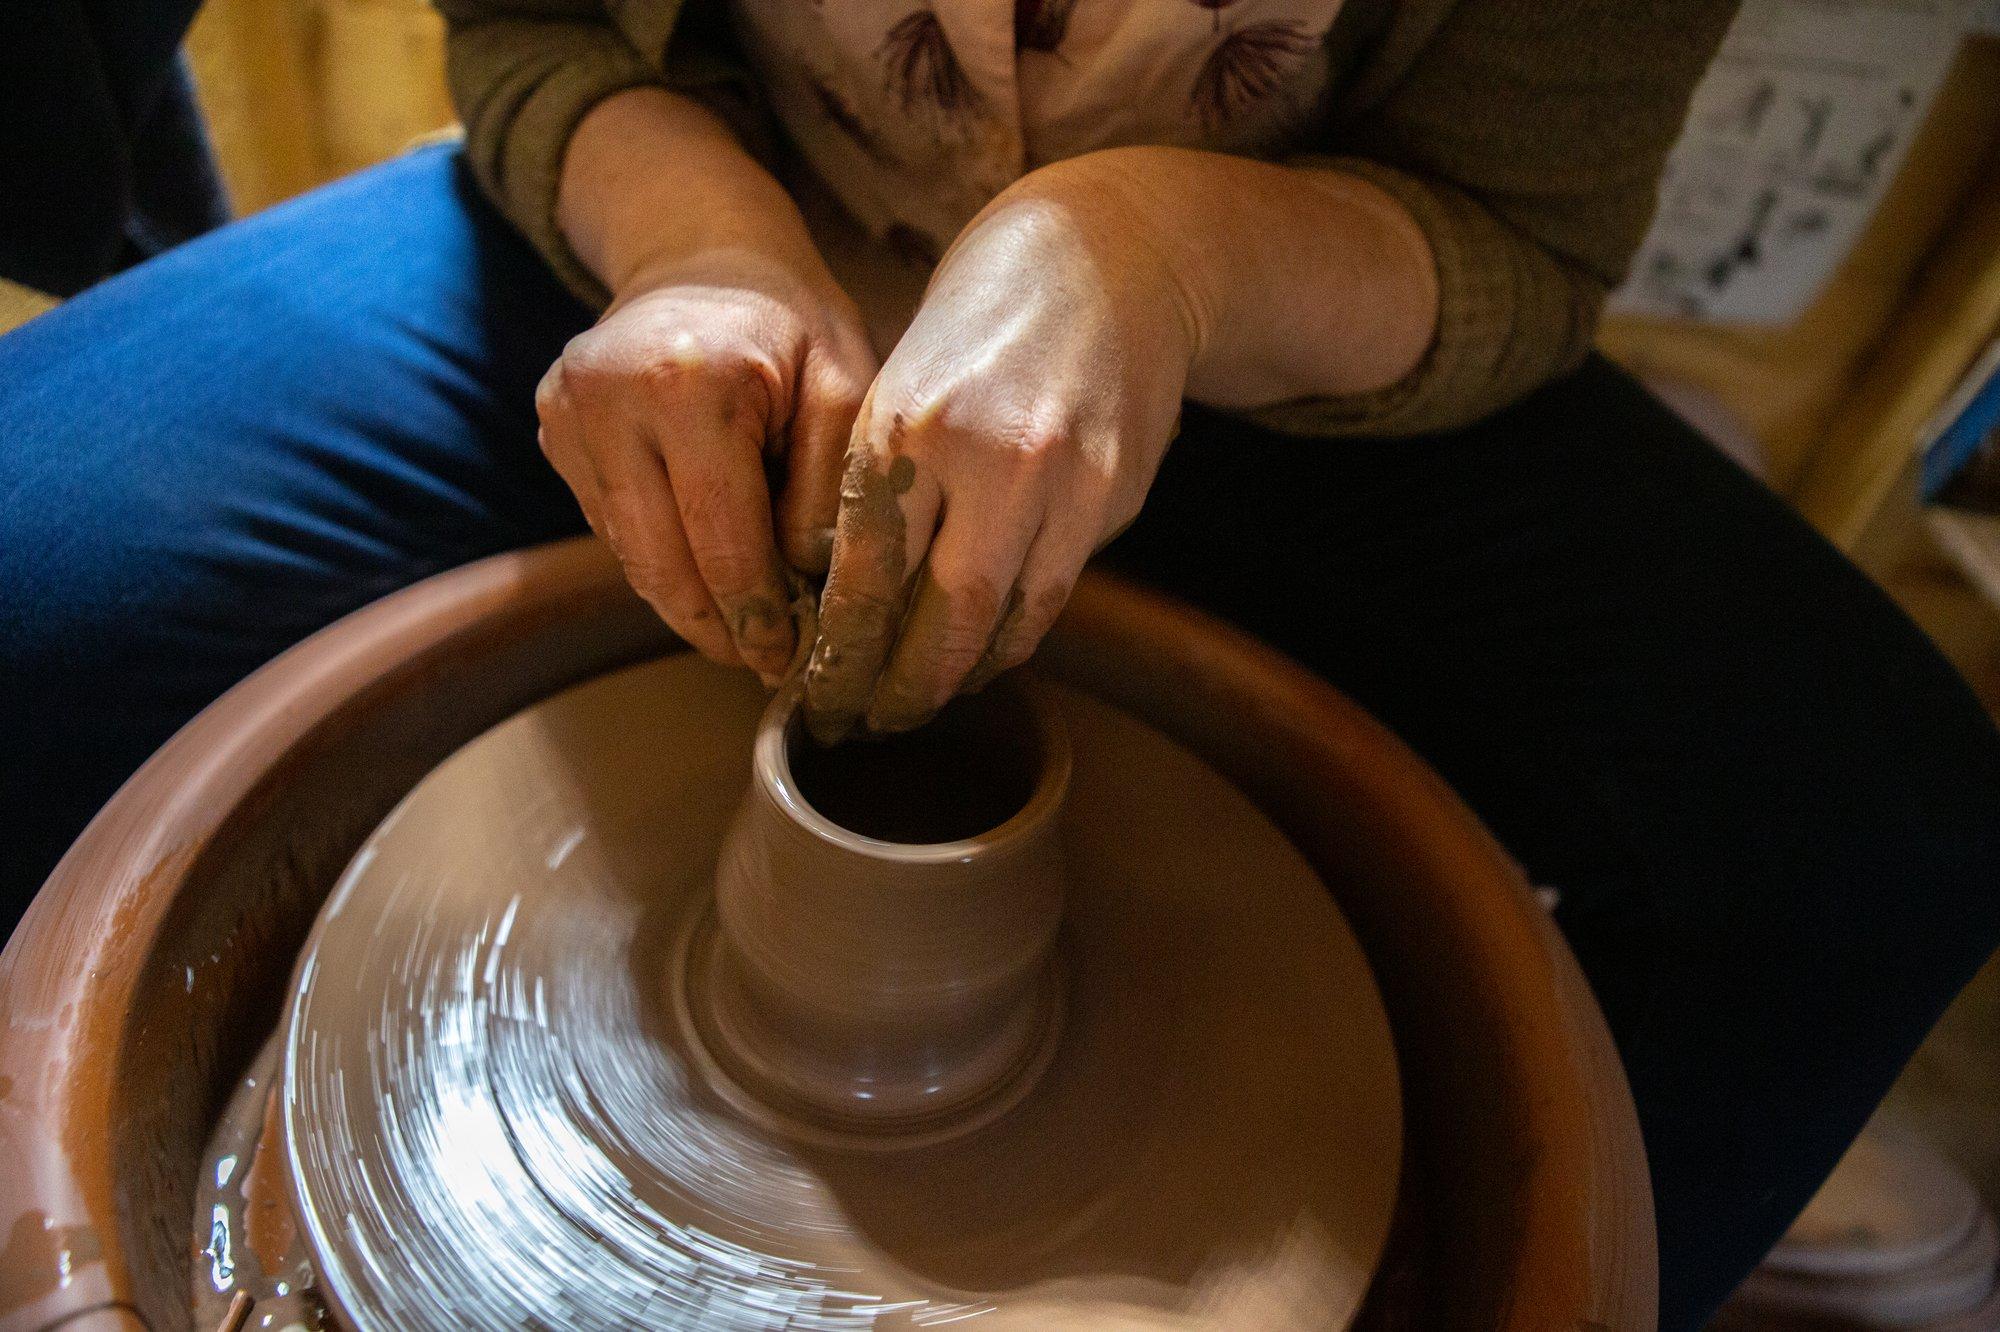 Ross is a potter in Florenceville-Bristol, New Brunswick, about a 90-minute drive northwest of Fredericton, and also works in her own ceramics studio at home.